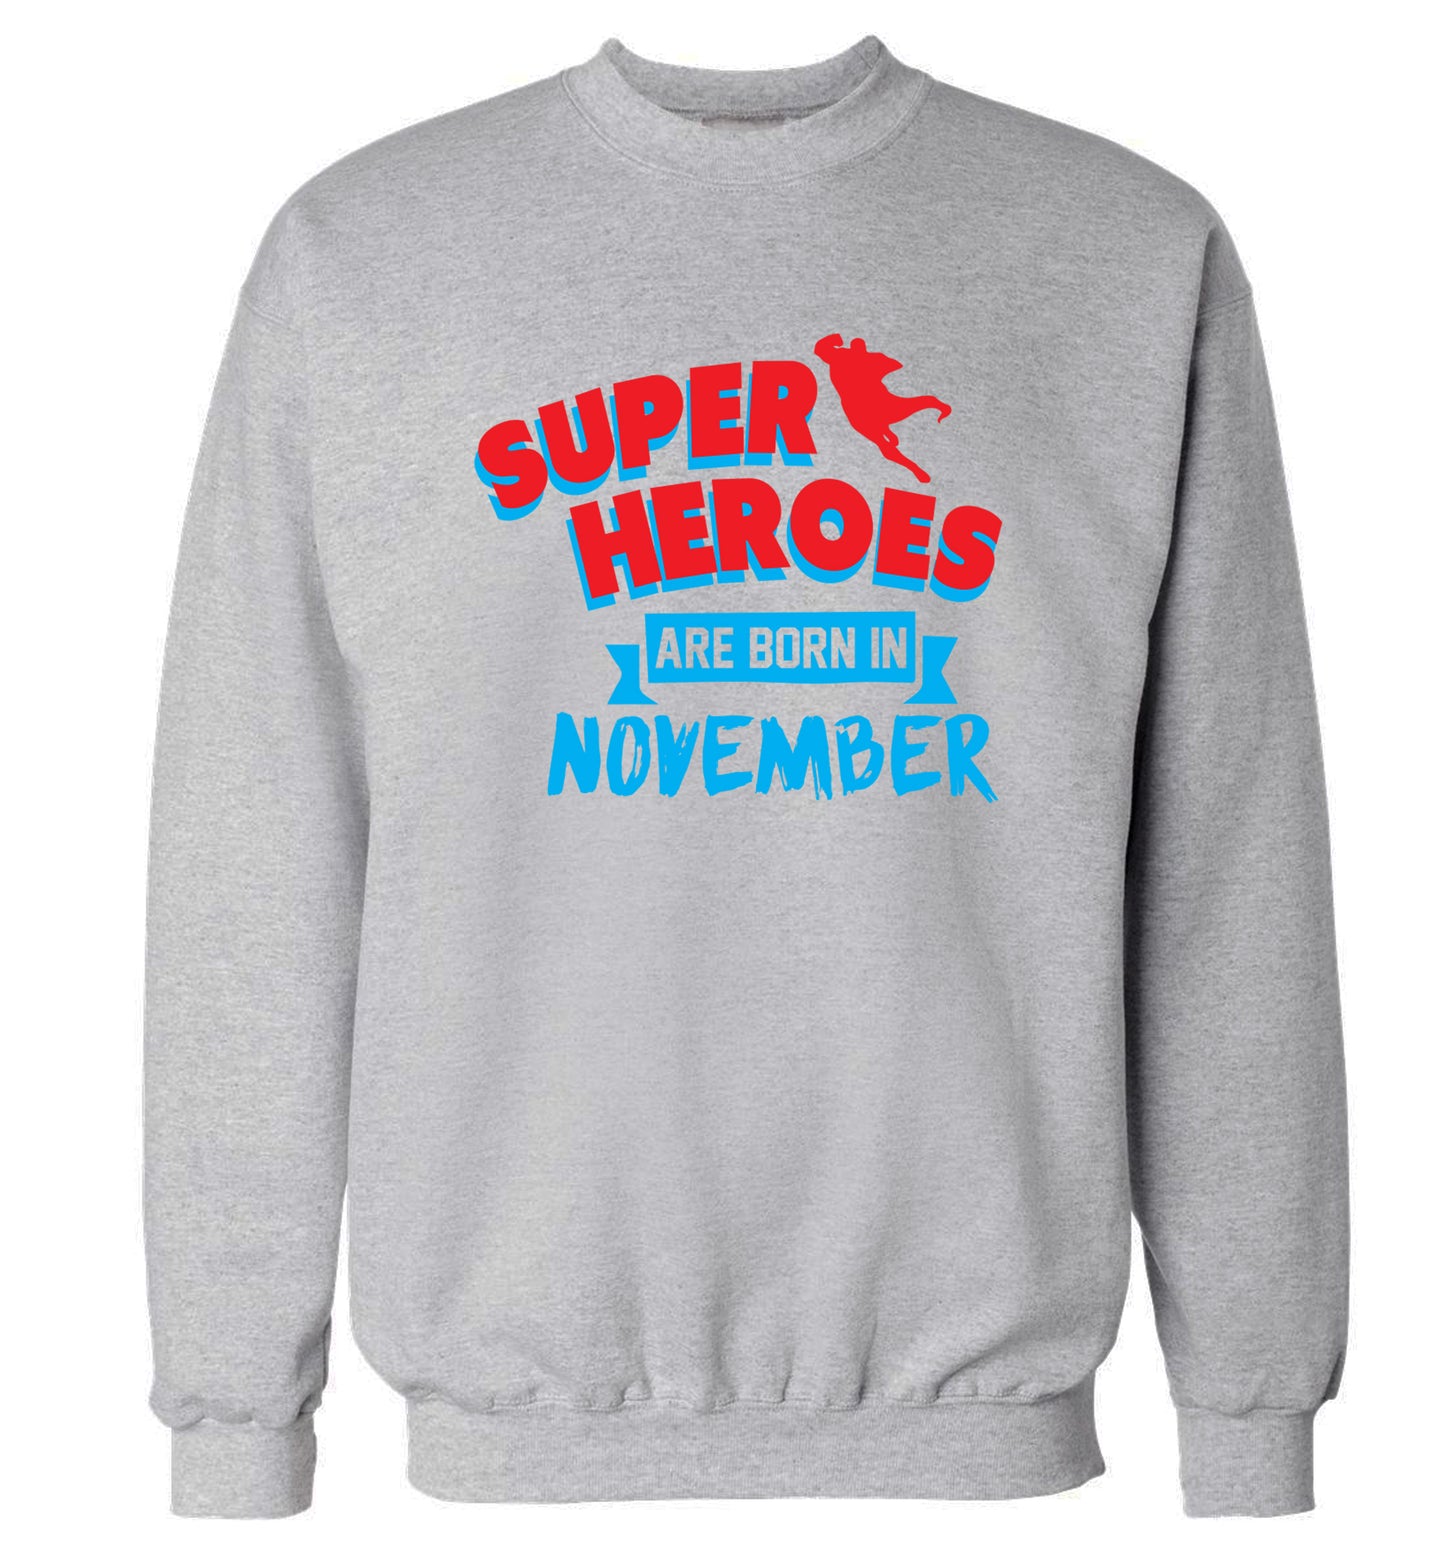 Superheroes are born in November Adult's unisex grey Sweater 2XL